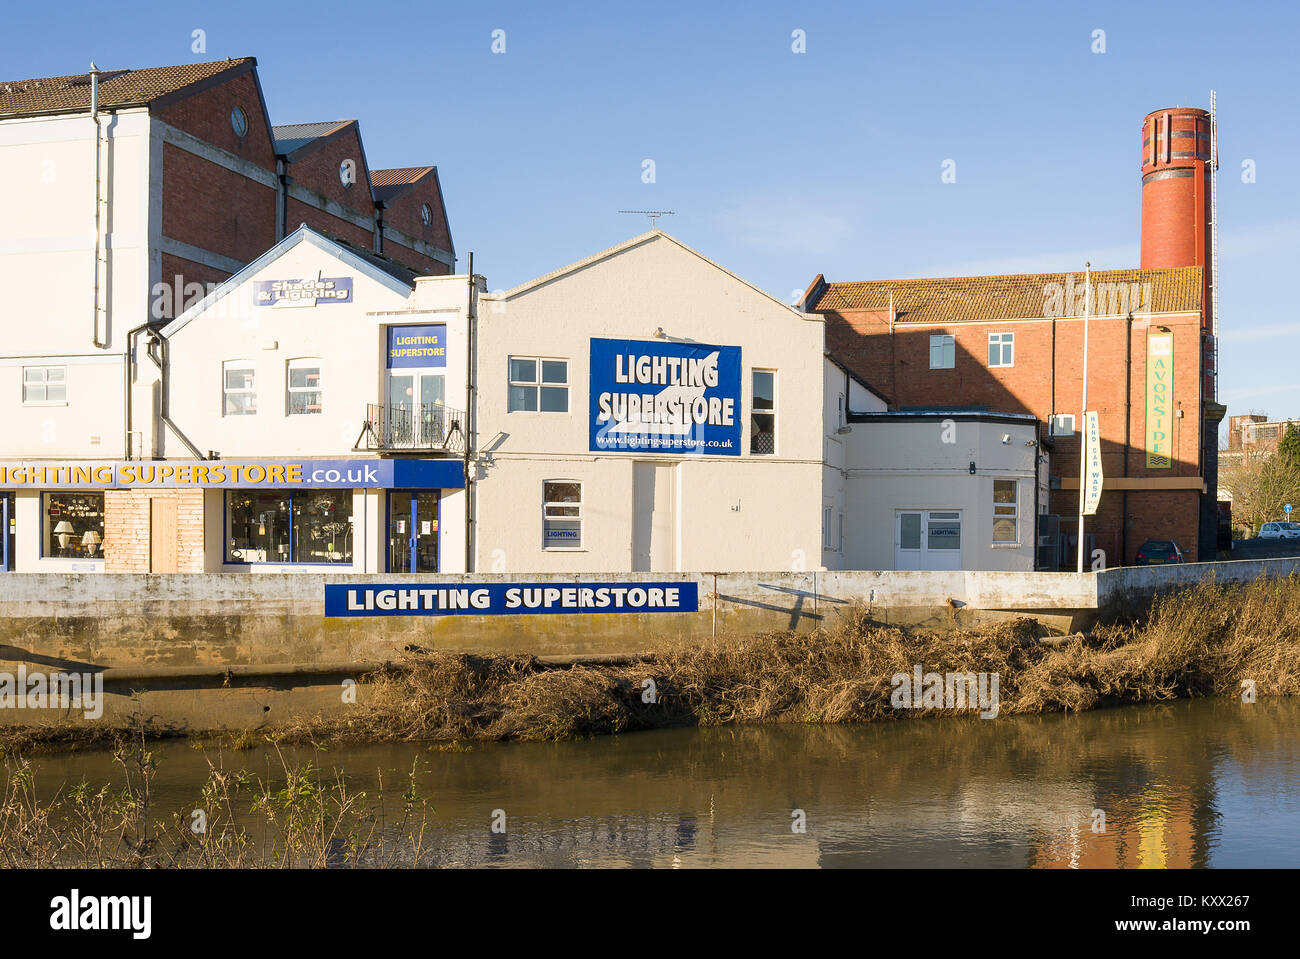 Lighting Superstore is one business now operating from a former wholesale dairy plant beside the River Avon in Melksham Wiltshire England UK Stock Photo